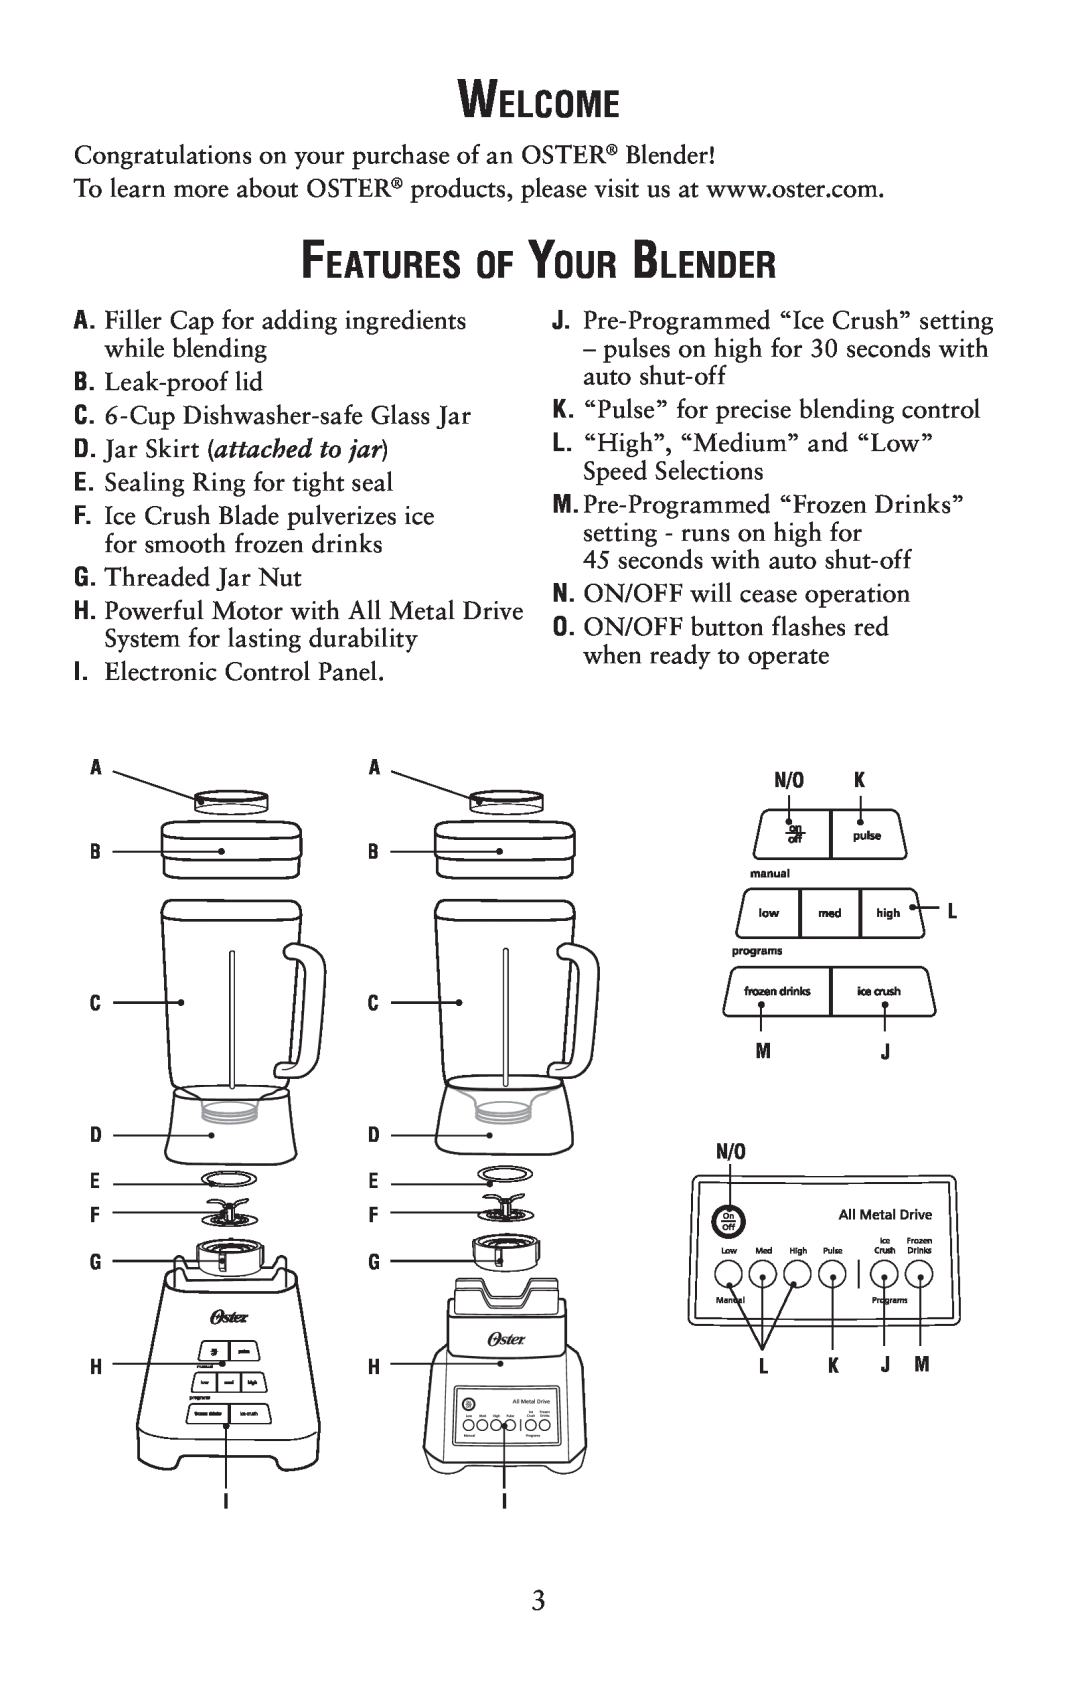 Oster 139846 user manual Welcome, Features of Your Blender, D.Jar Skirt attached to jar 